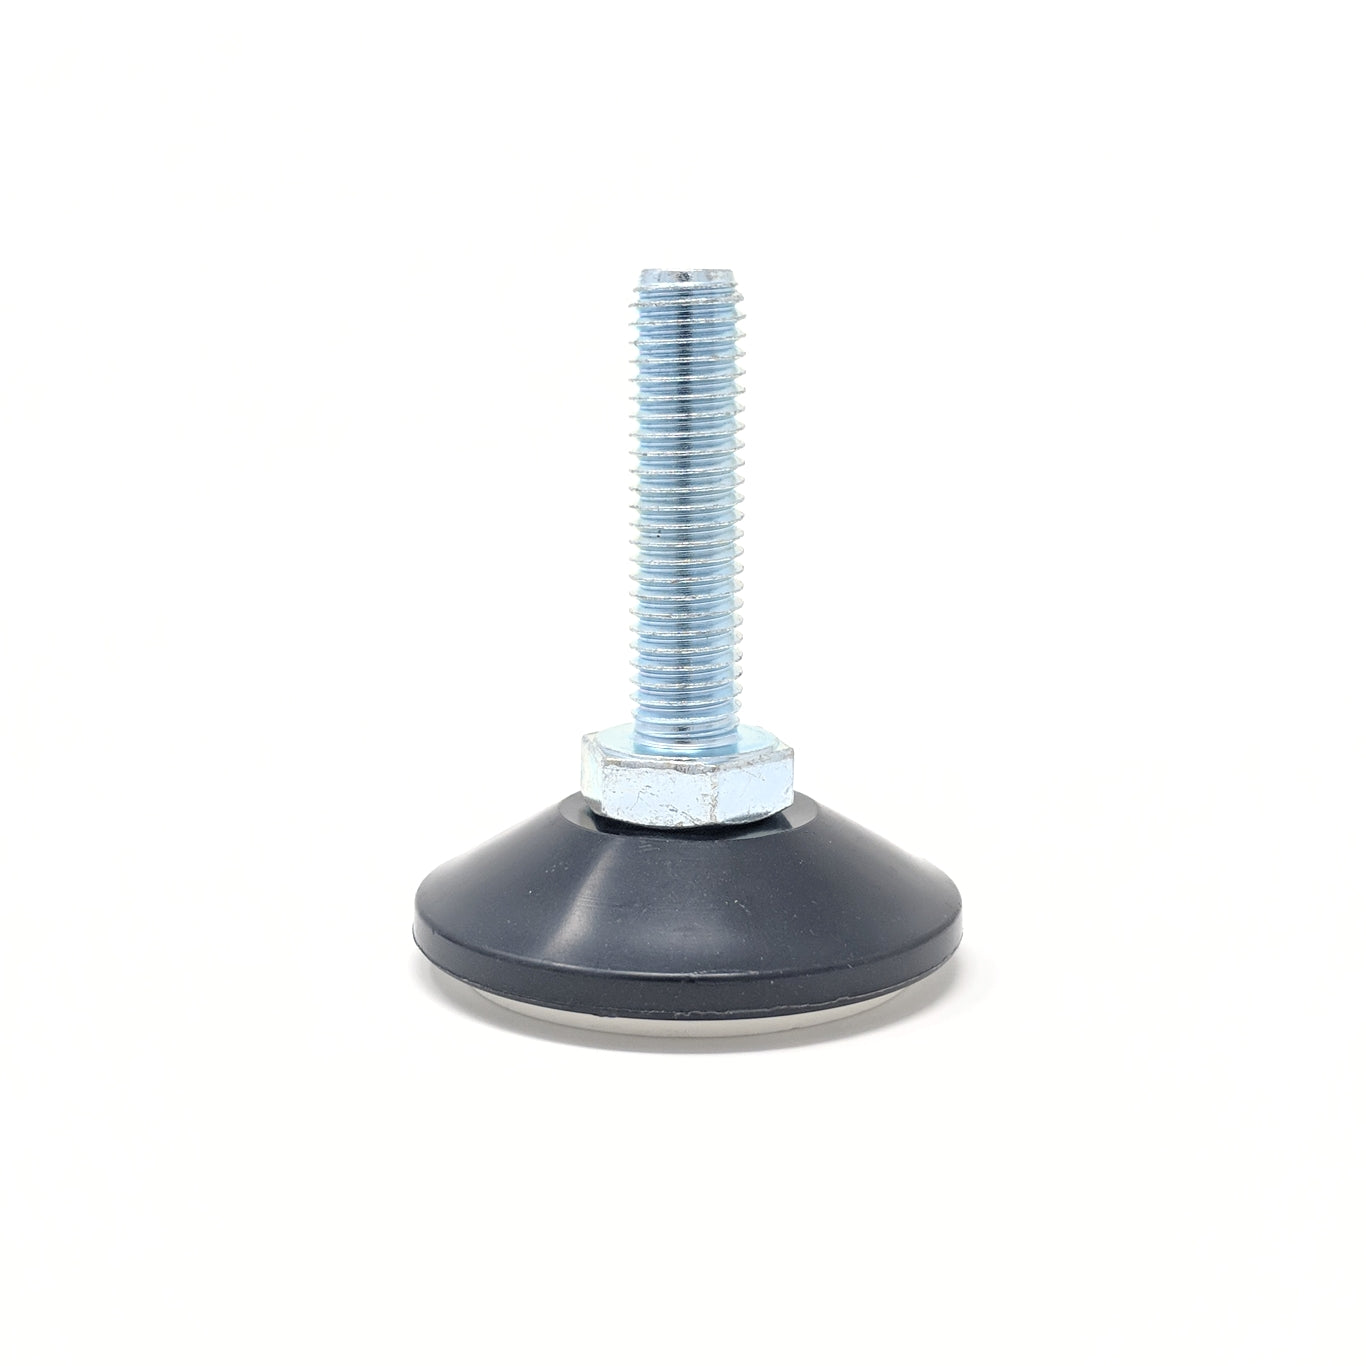 48mm-M10x40mm Non-Slip Screw In Levelling Machine Feet Height Adjustable, Made In Germany - Keay Vital Parts